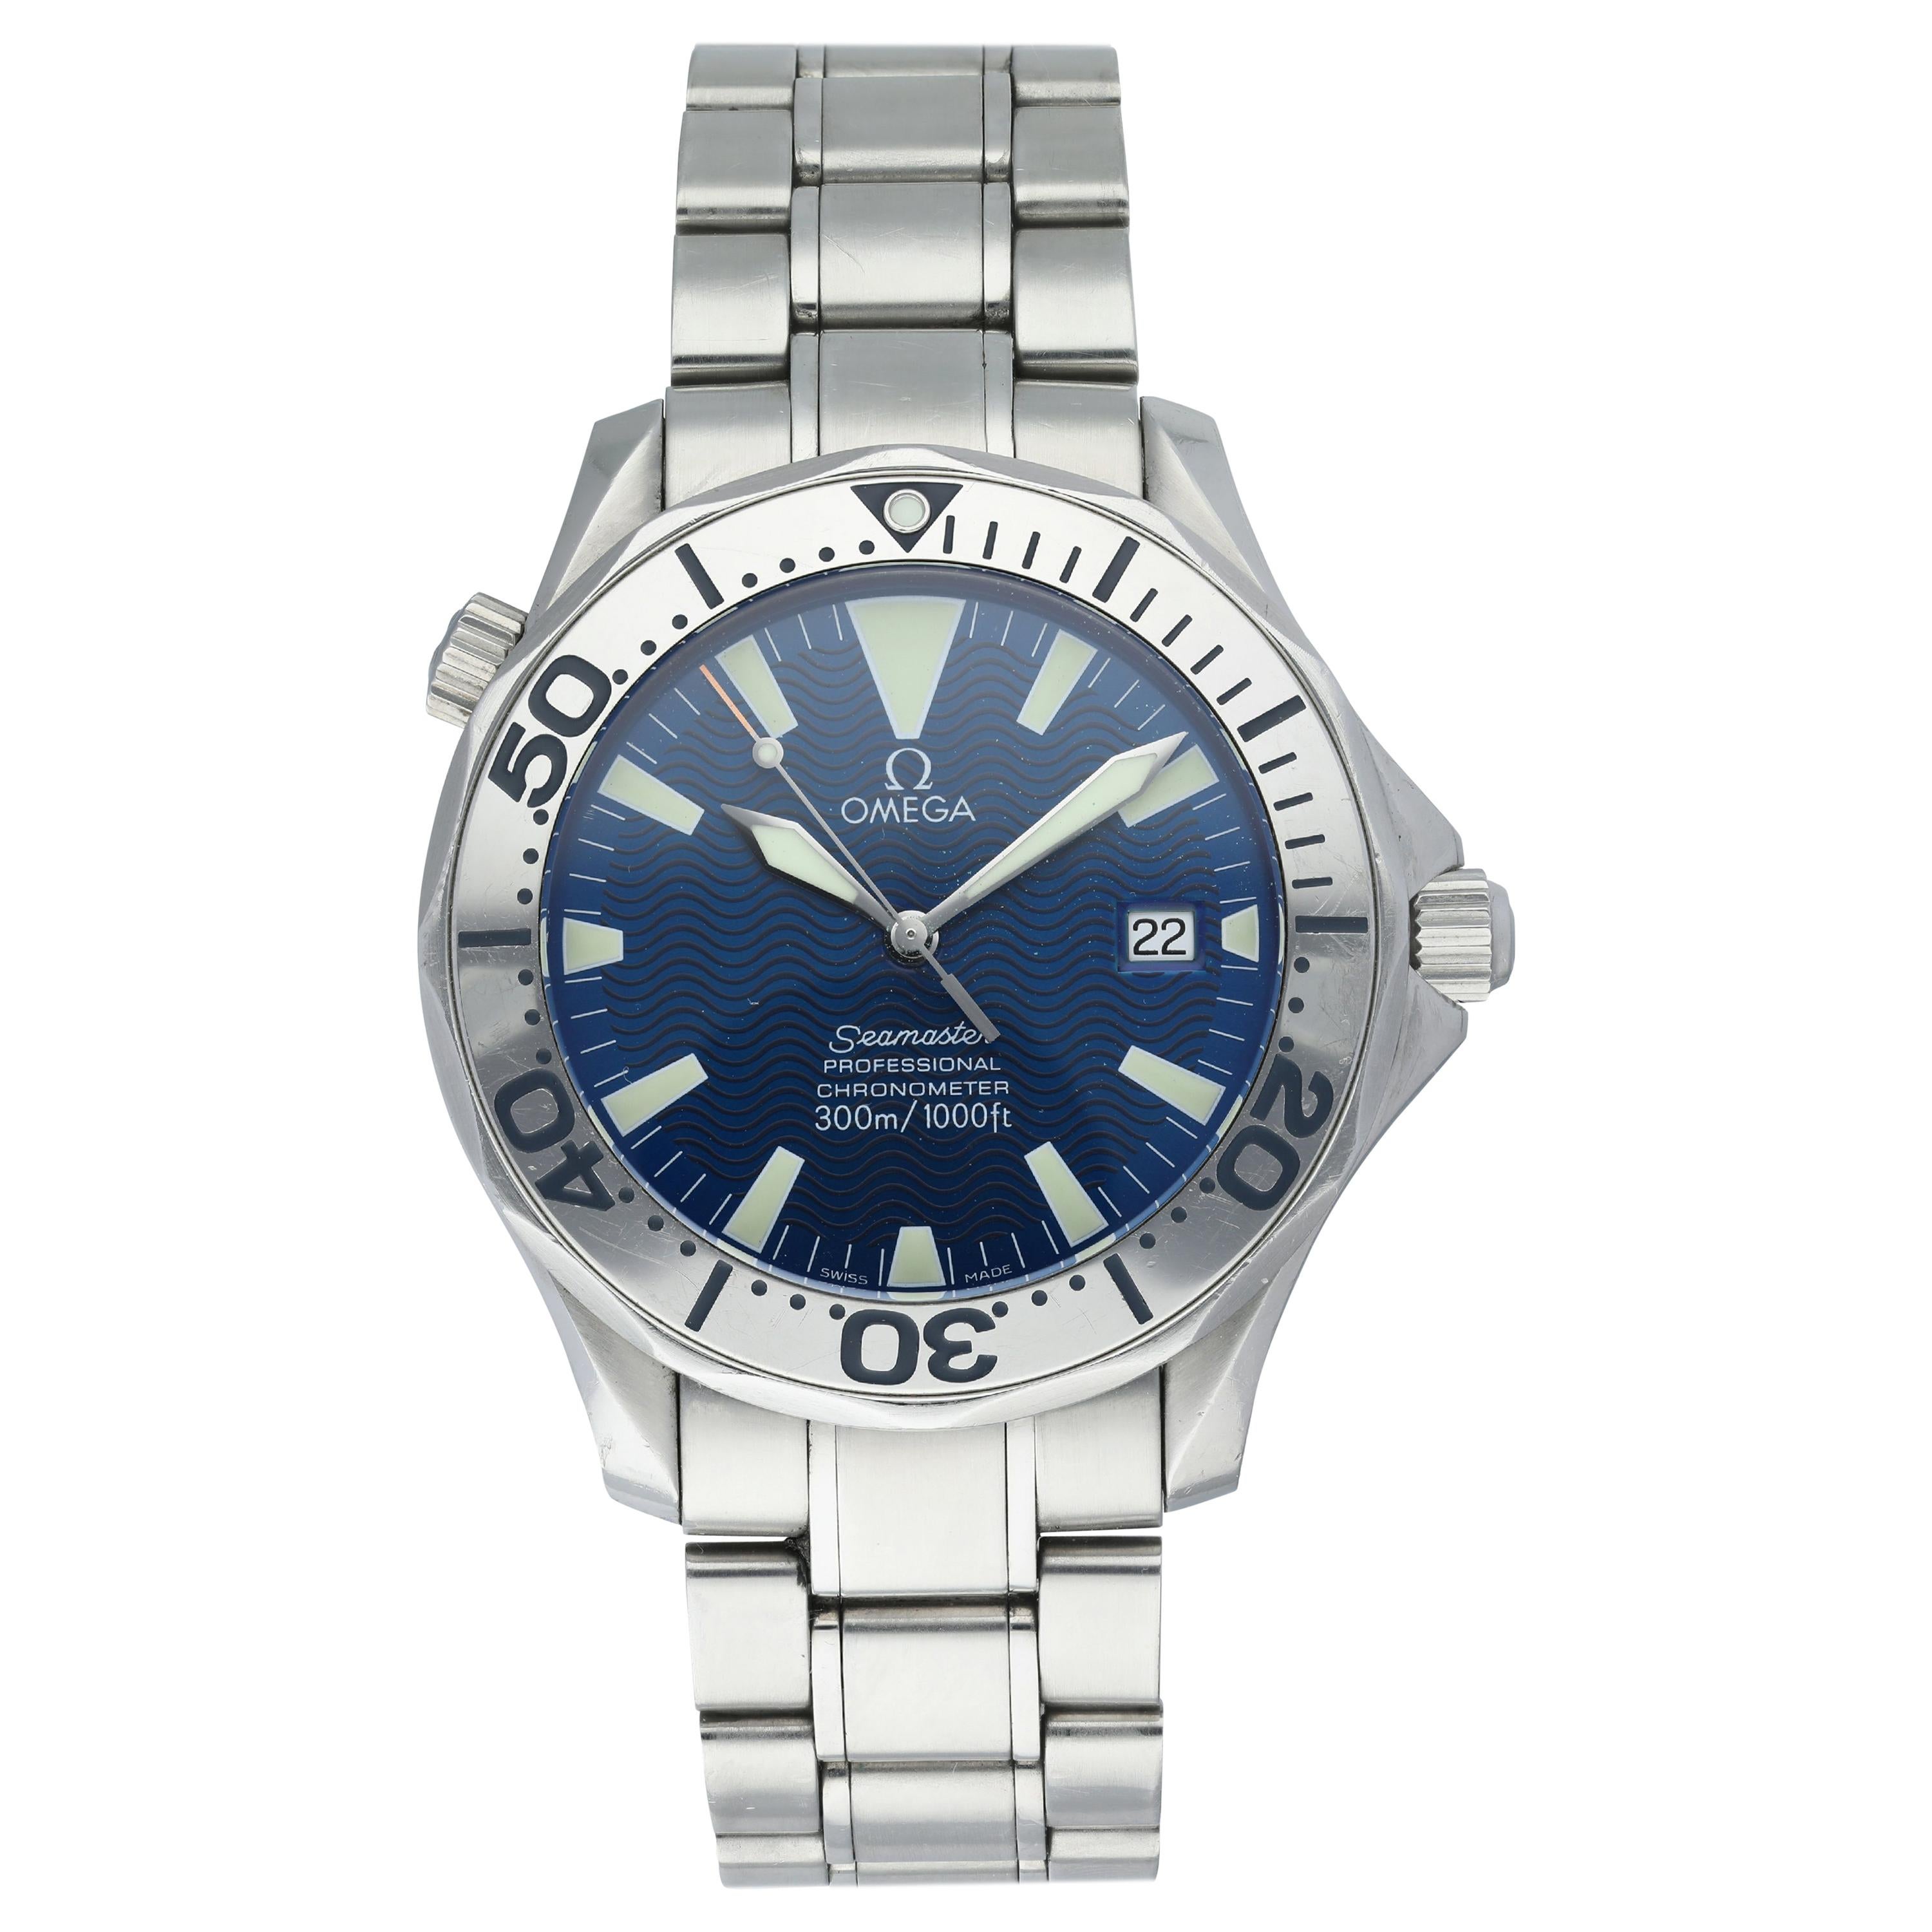 Omega Seamaster Professional 2255.80.00 Men's Watch For Sale